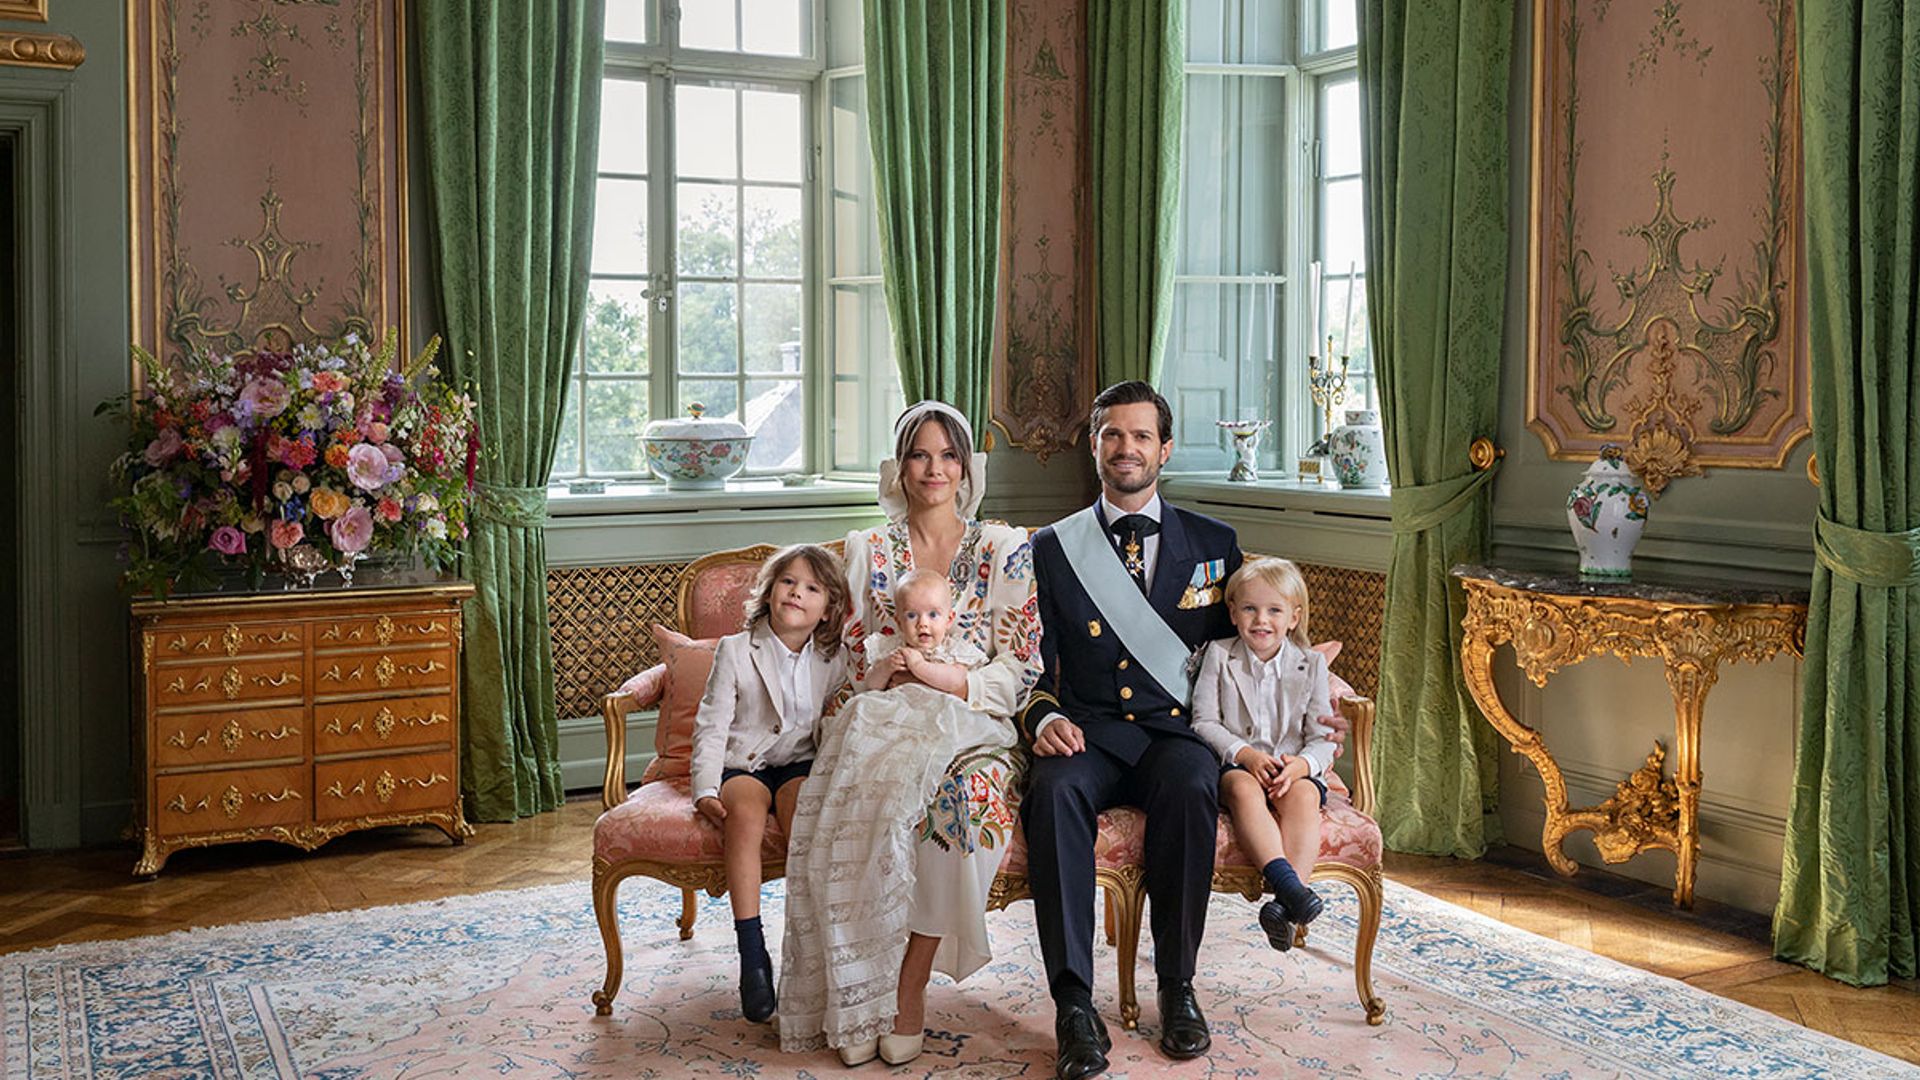 Princess Sofia and Prince Carl Philip look picture perfect in Prince Julian's christening photos